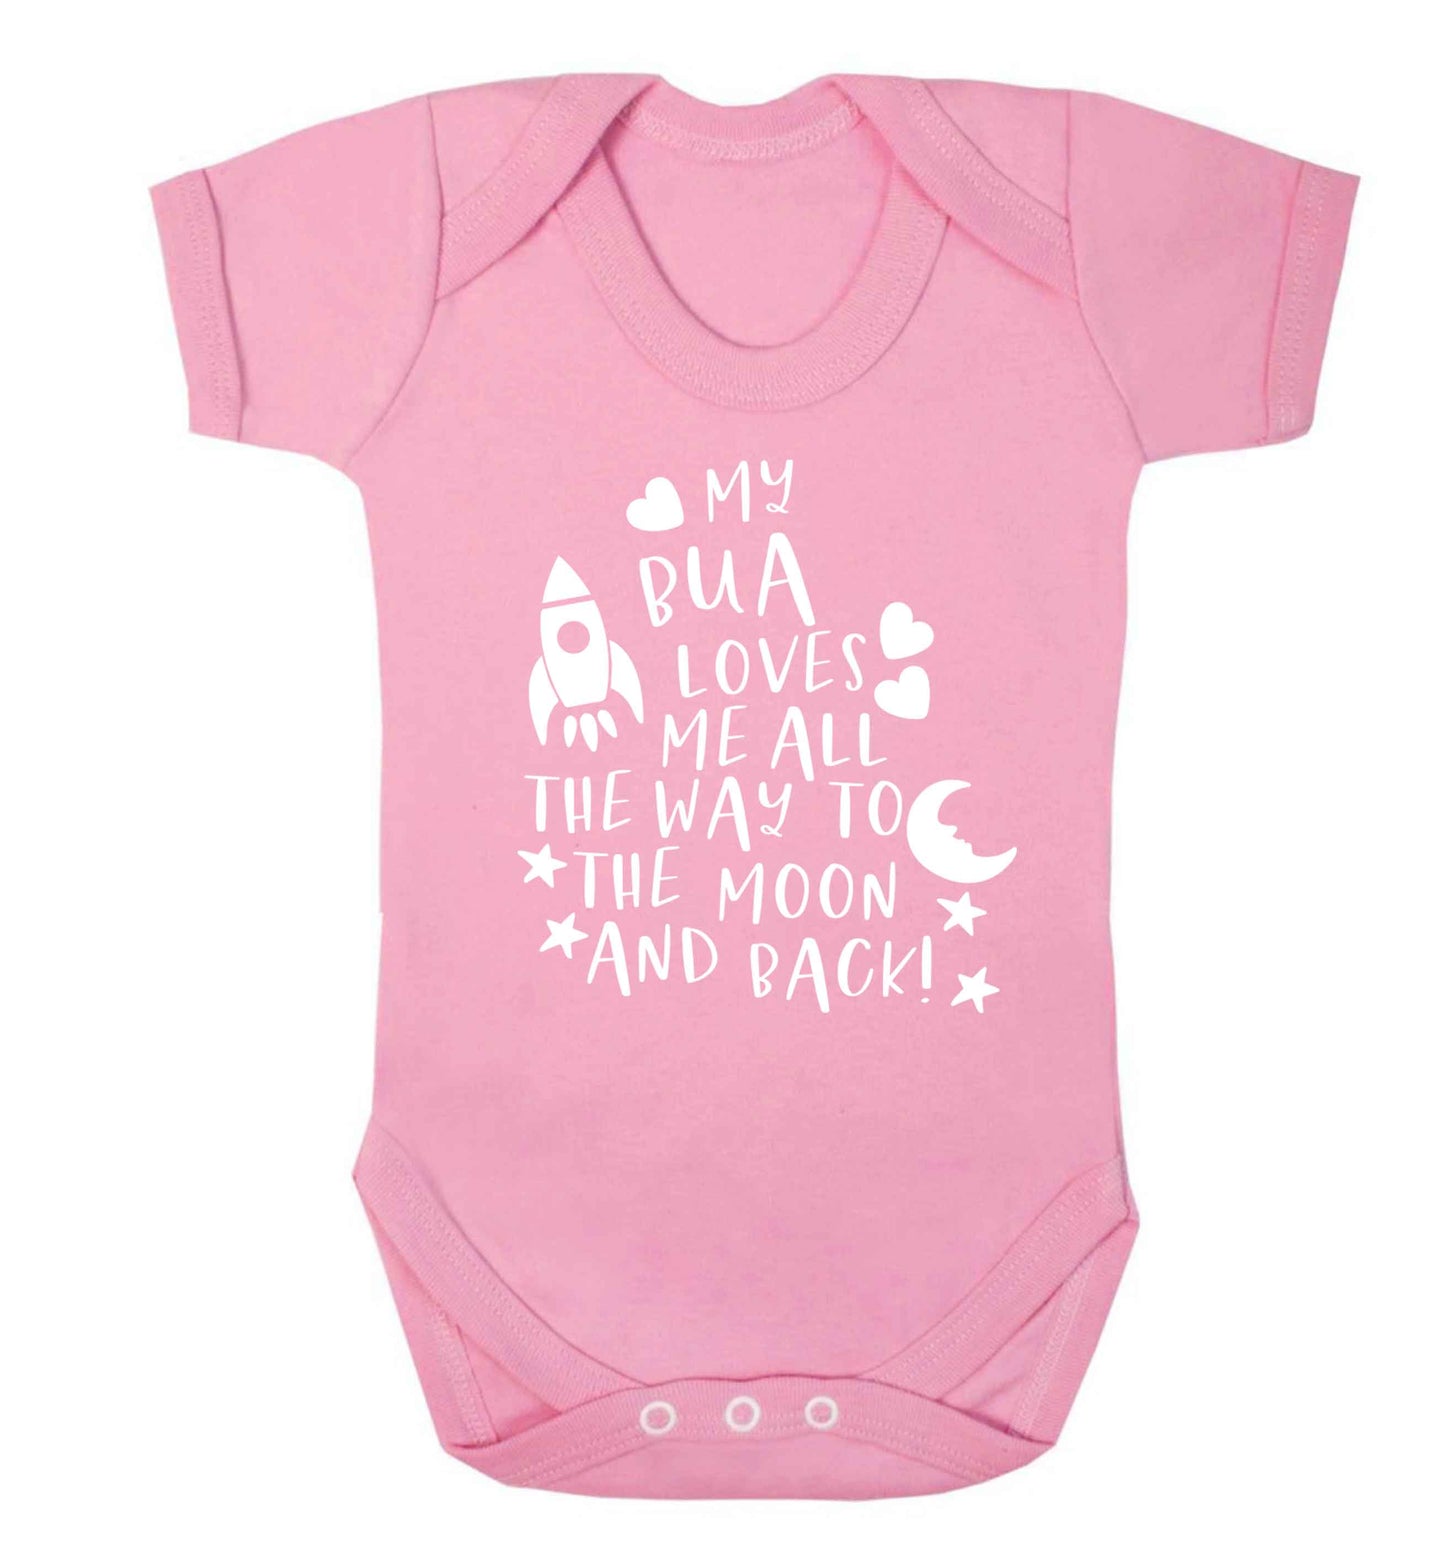 My bua loves me all they way to the moon and back Baby Vest pale pink 18-24 months